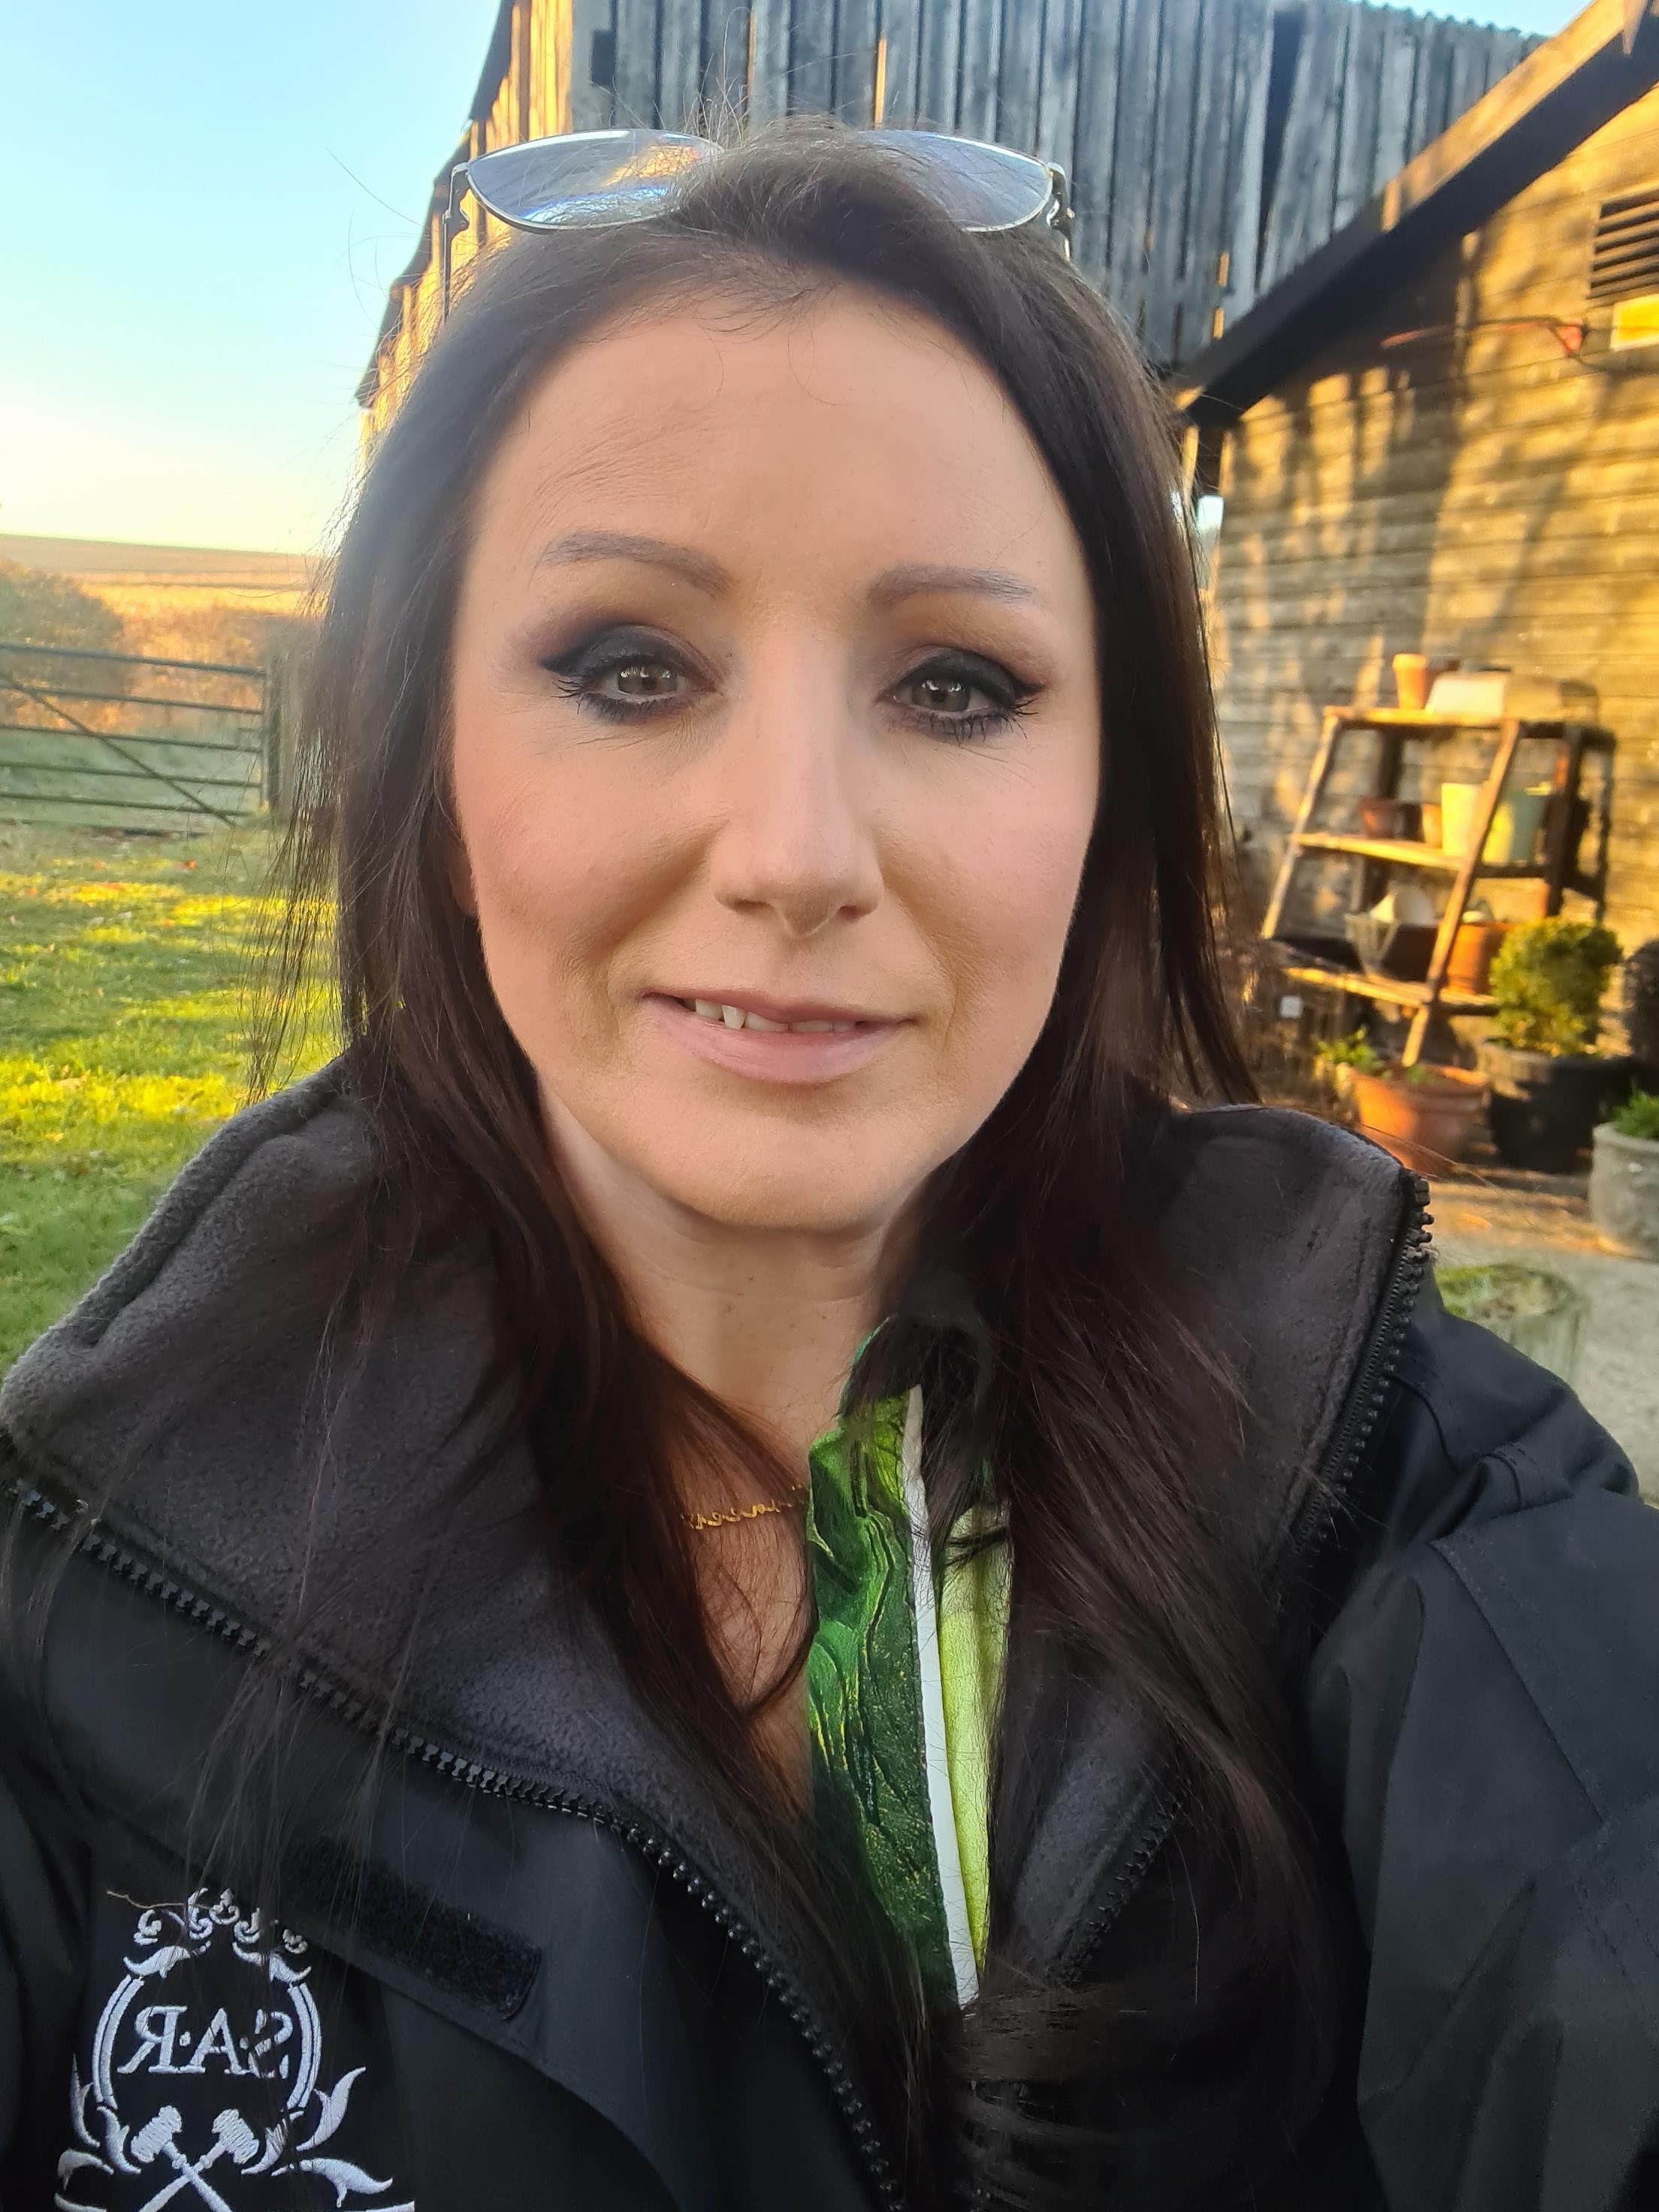 Auctioneer Jessica Wall's Bargain Hunt at Naseby